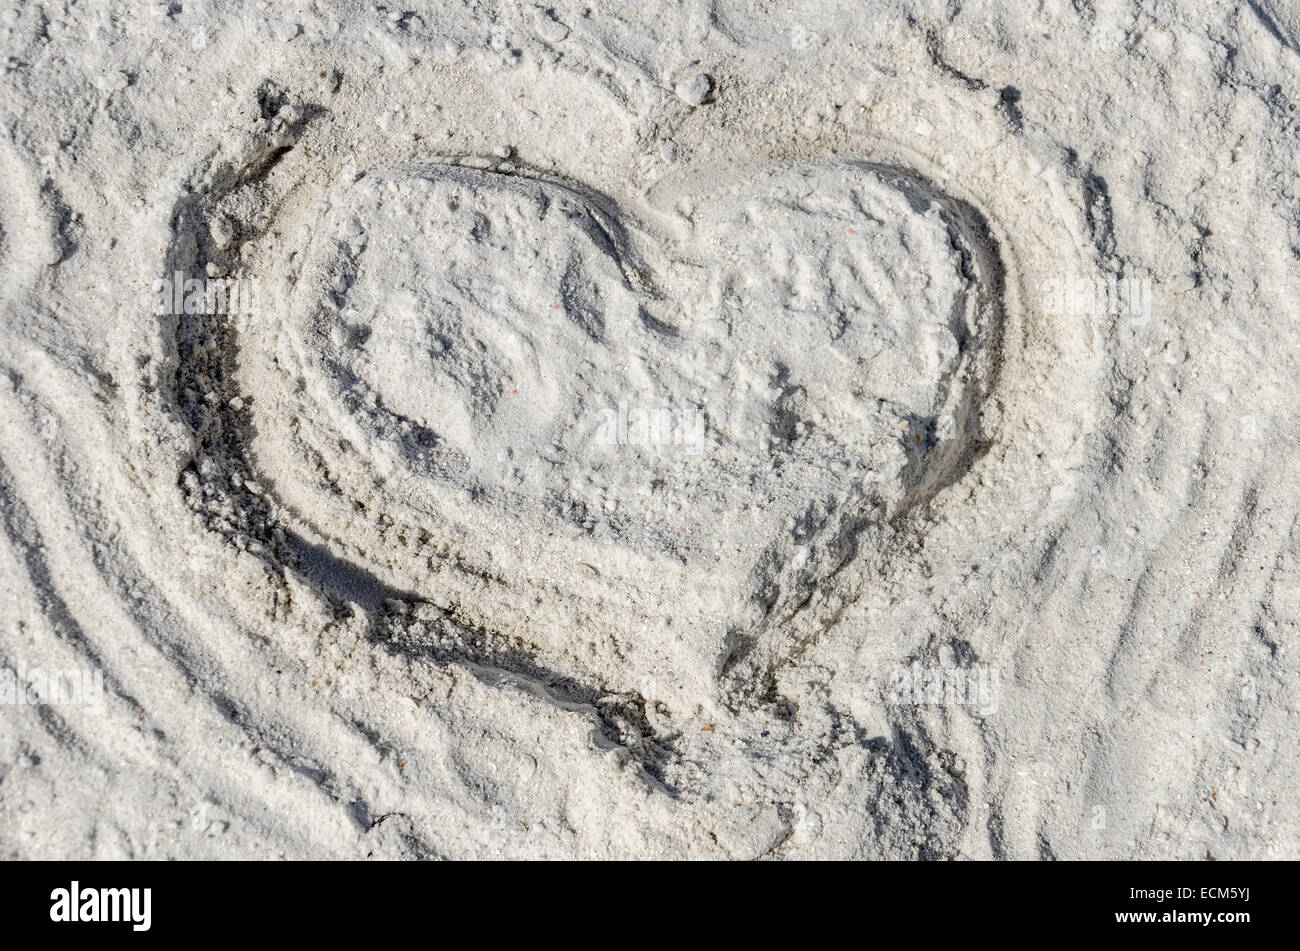 The symbol of heart is drawn on sand Stock Photo